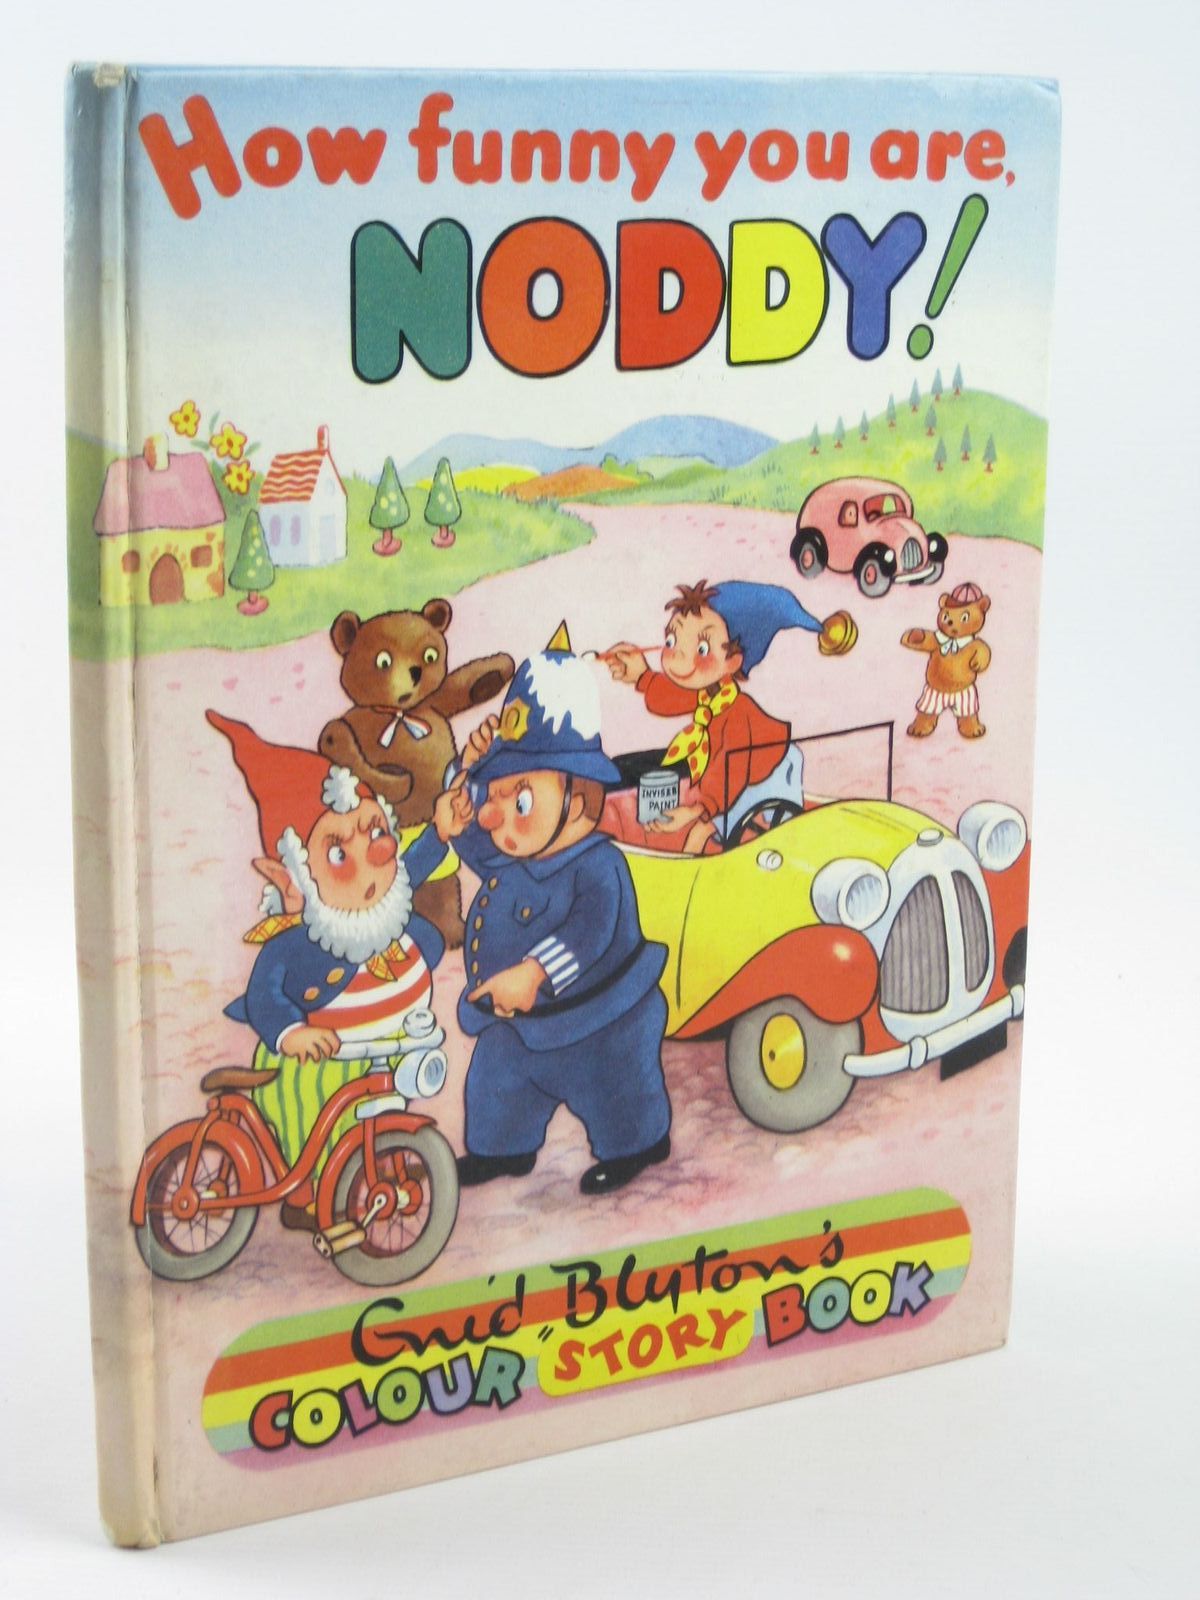 Cover of HOW FUNNY YOU ARE NODDY! by Enid Blyton